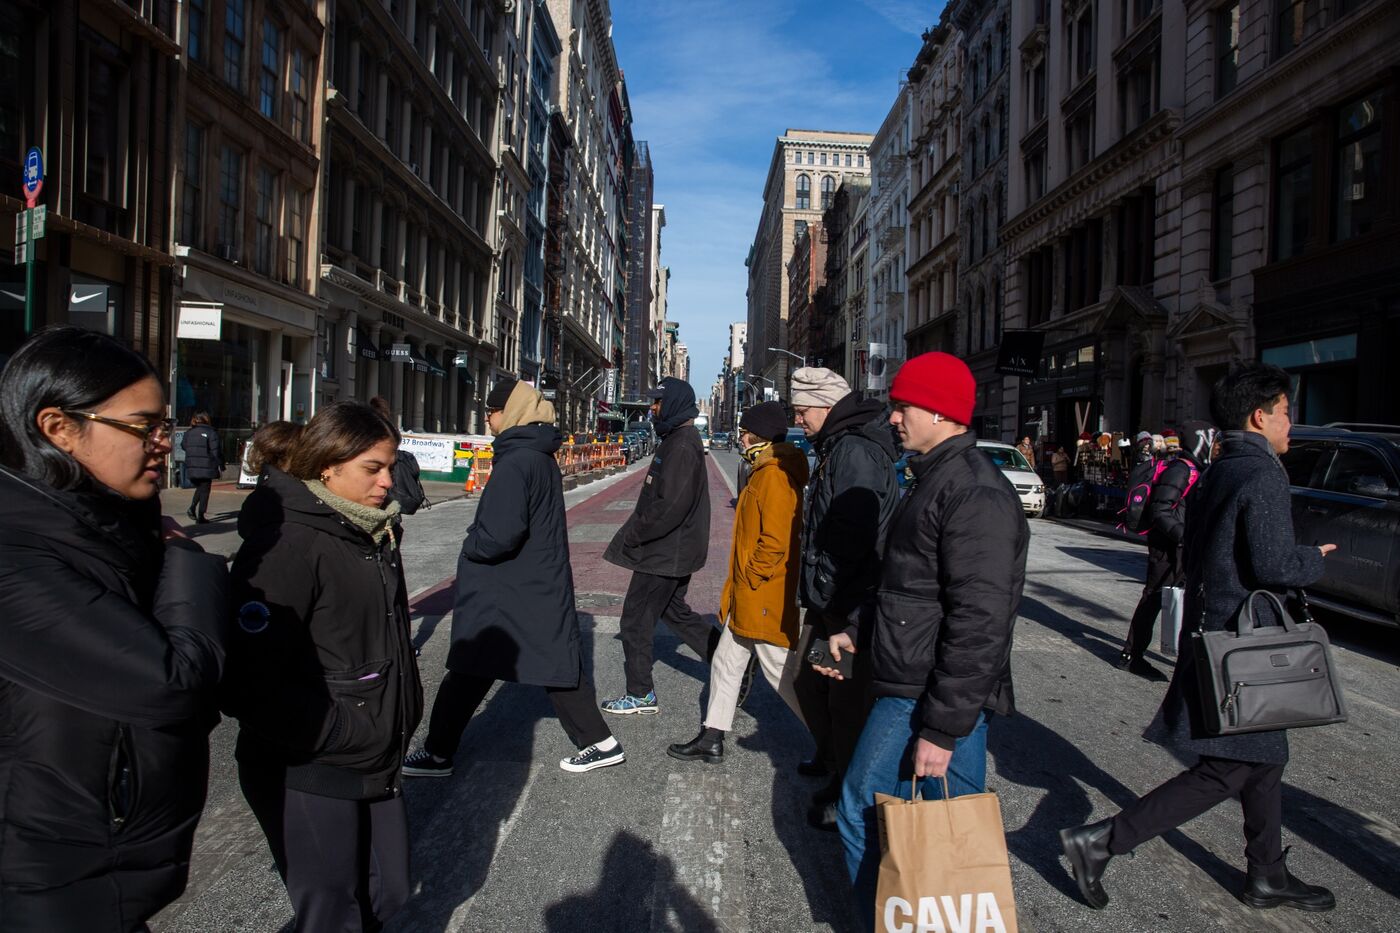 Shoppers and pedestrians on Broadway in the Soho neighborhood of New York, US